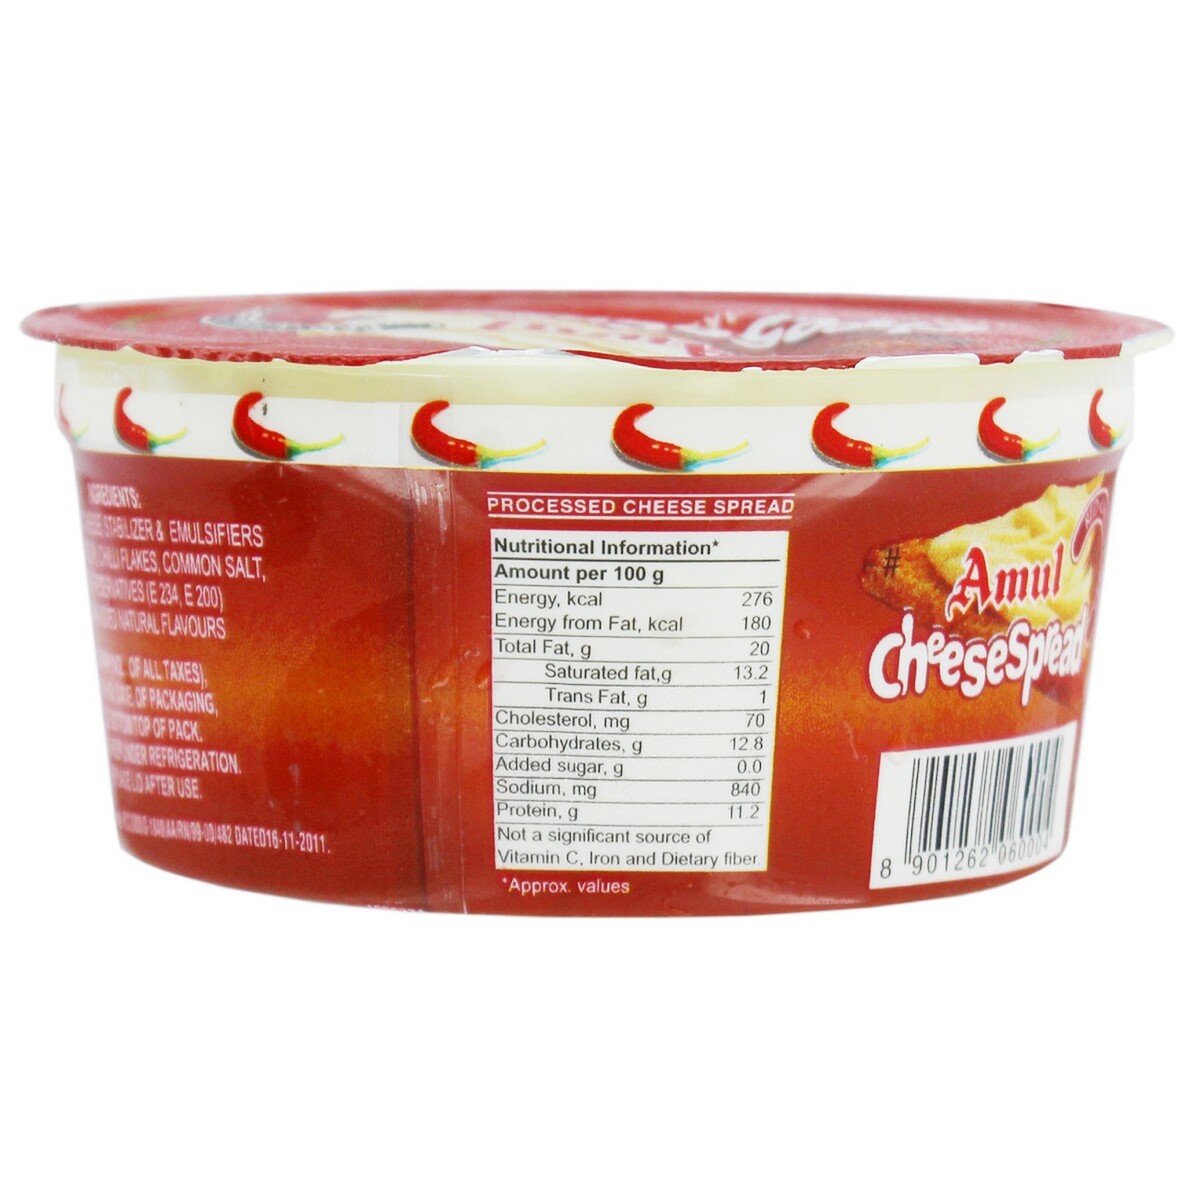 Amul Cheese Spread Red Chili Flake 200g